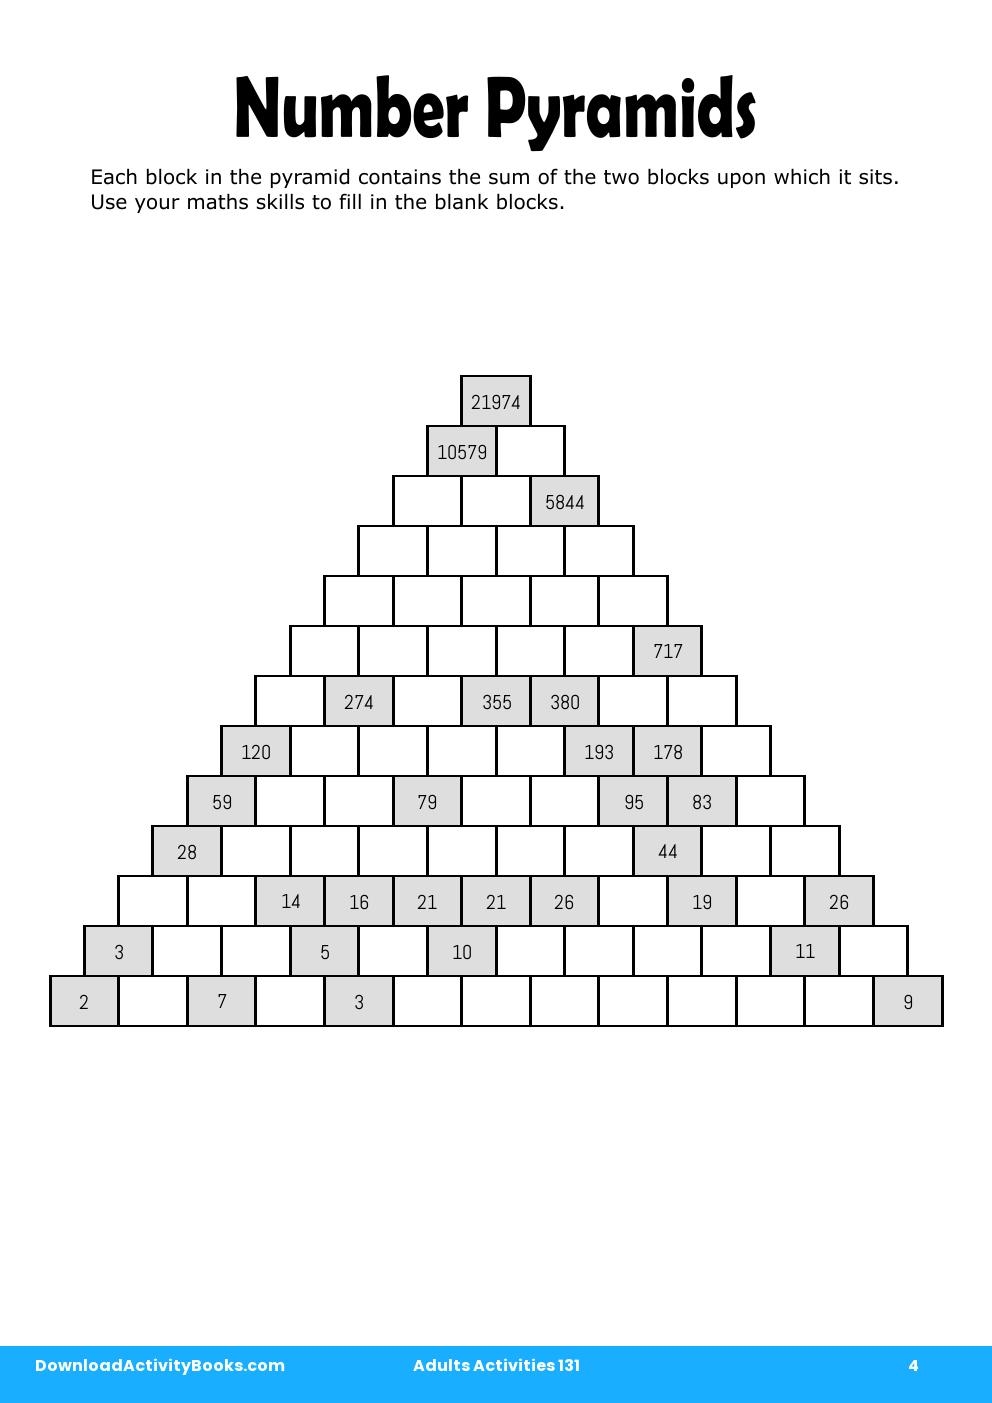 Number Pyramids in Adults Activities 131